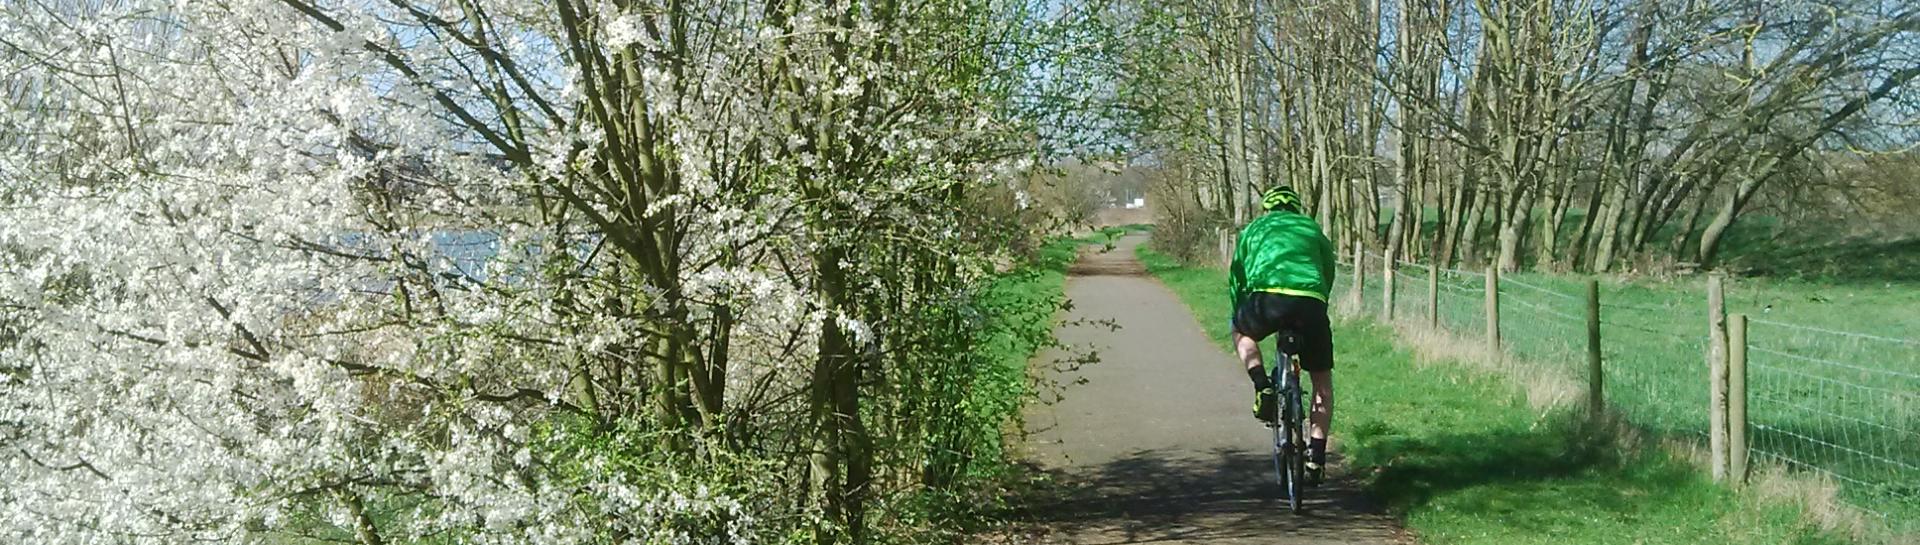 Cyclist on cycle path in spring with tree in blossom